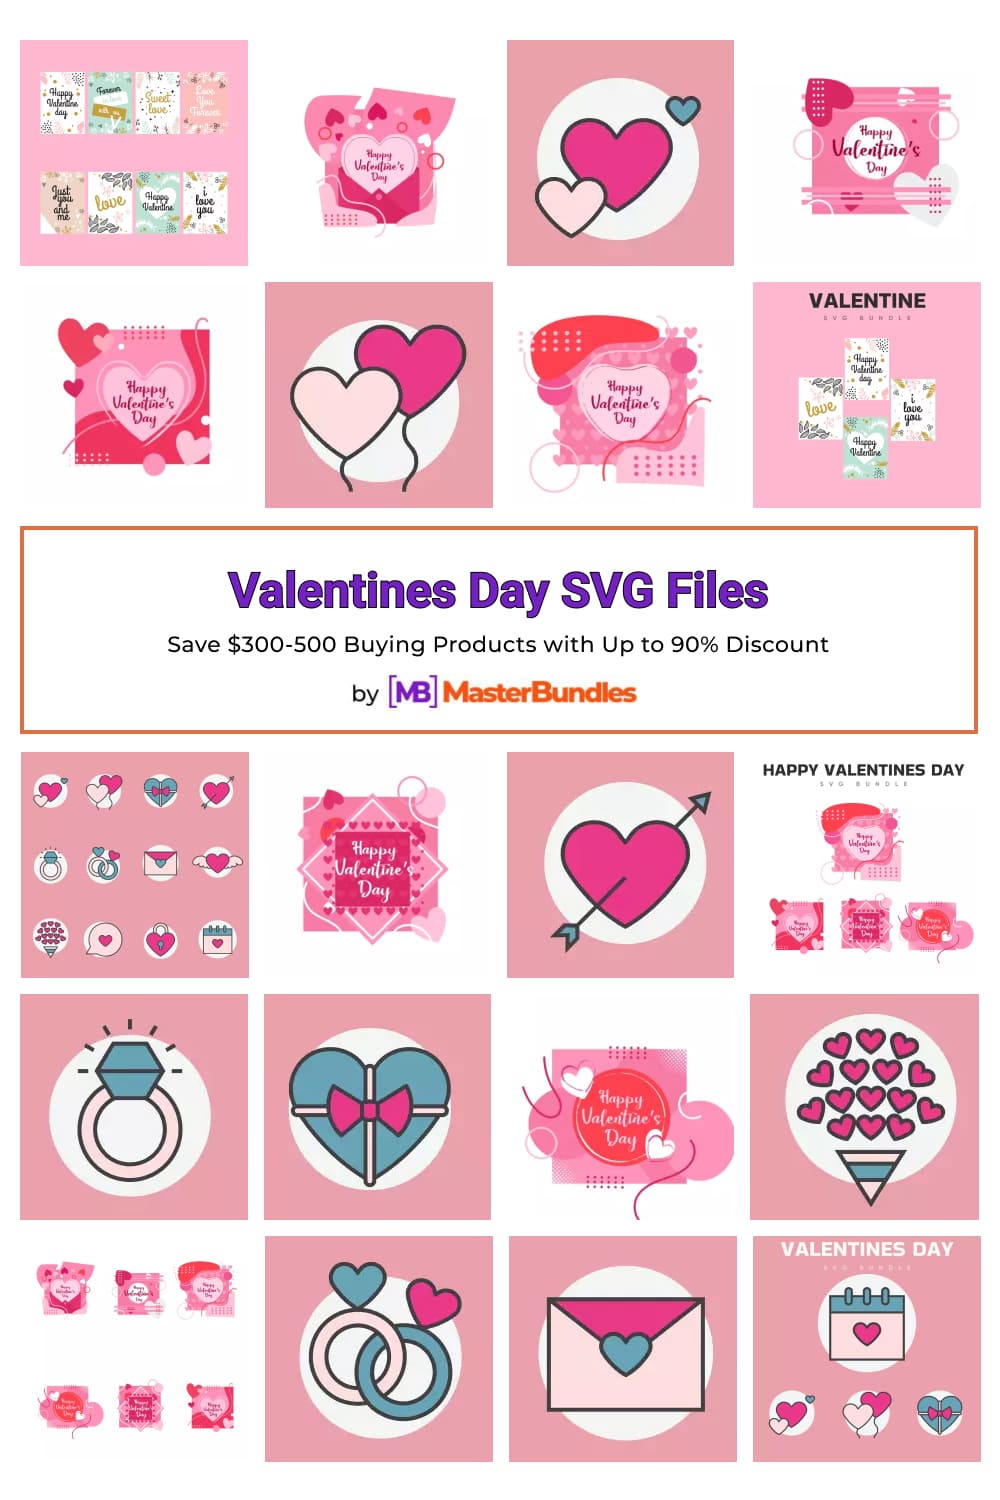 Valentines Day SVG Files for Pinterest.